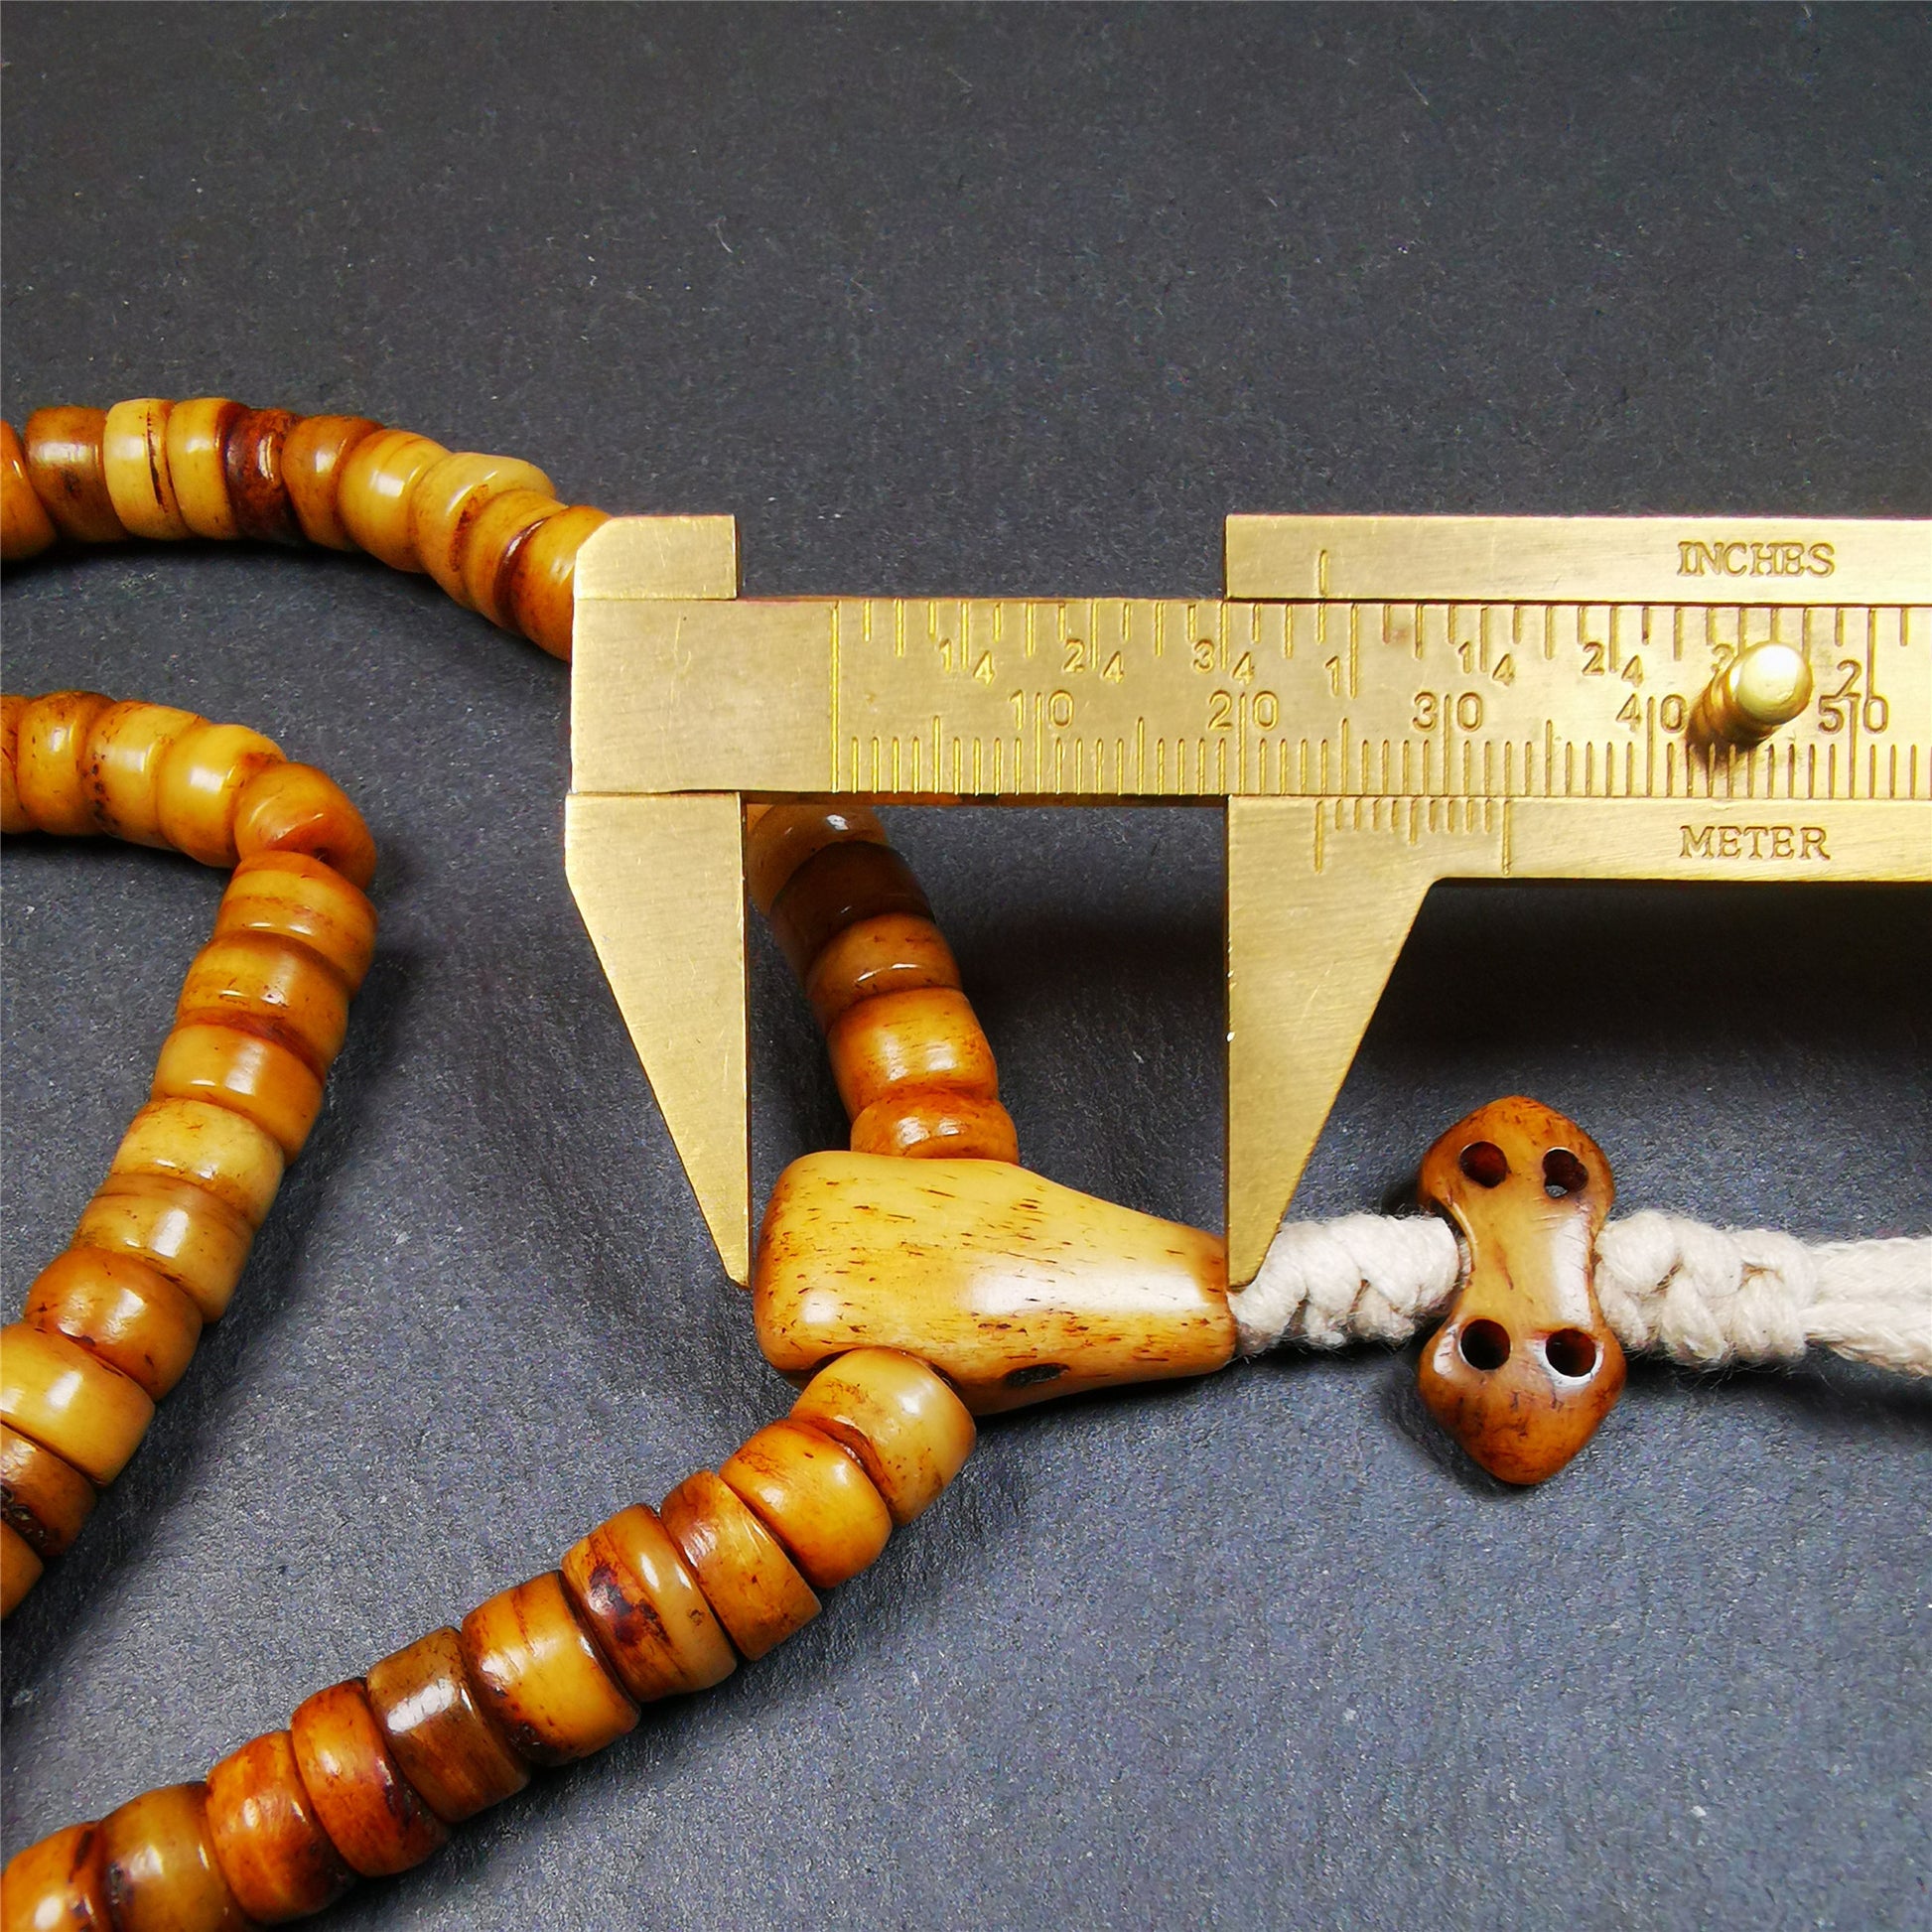 This yak bone mala was handmade from tibetan crafts man in Baiyu County,about 30 years old. It's composed of 108 pcs 9mm bone beads,with agate, turquoise,bone guru bead,and vajra pendant.